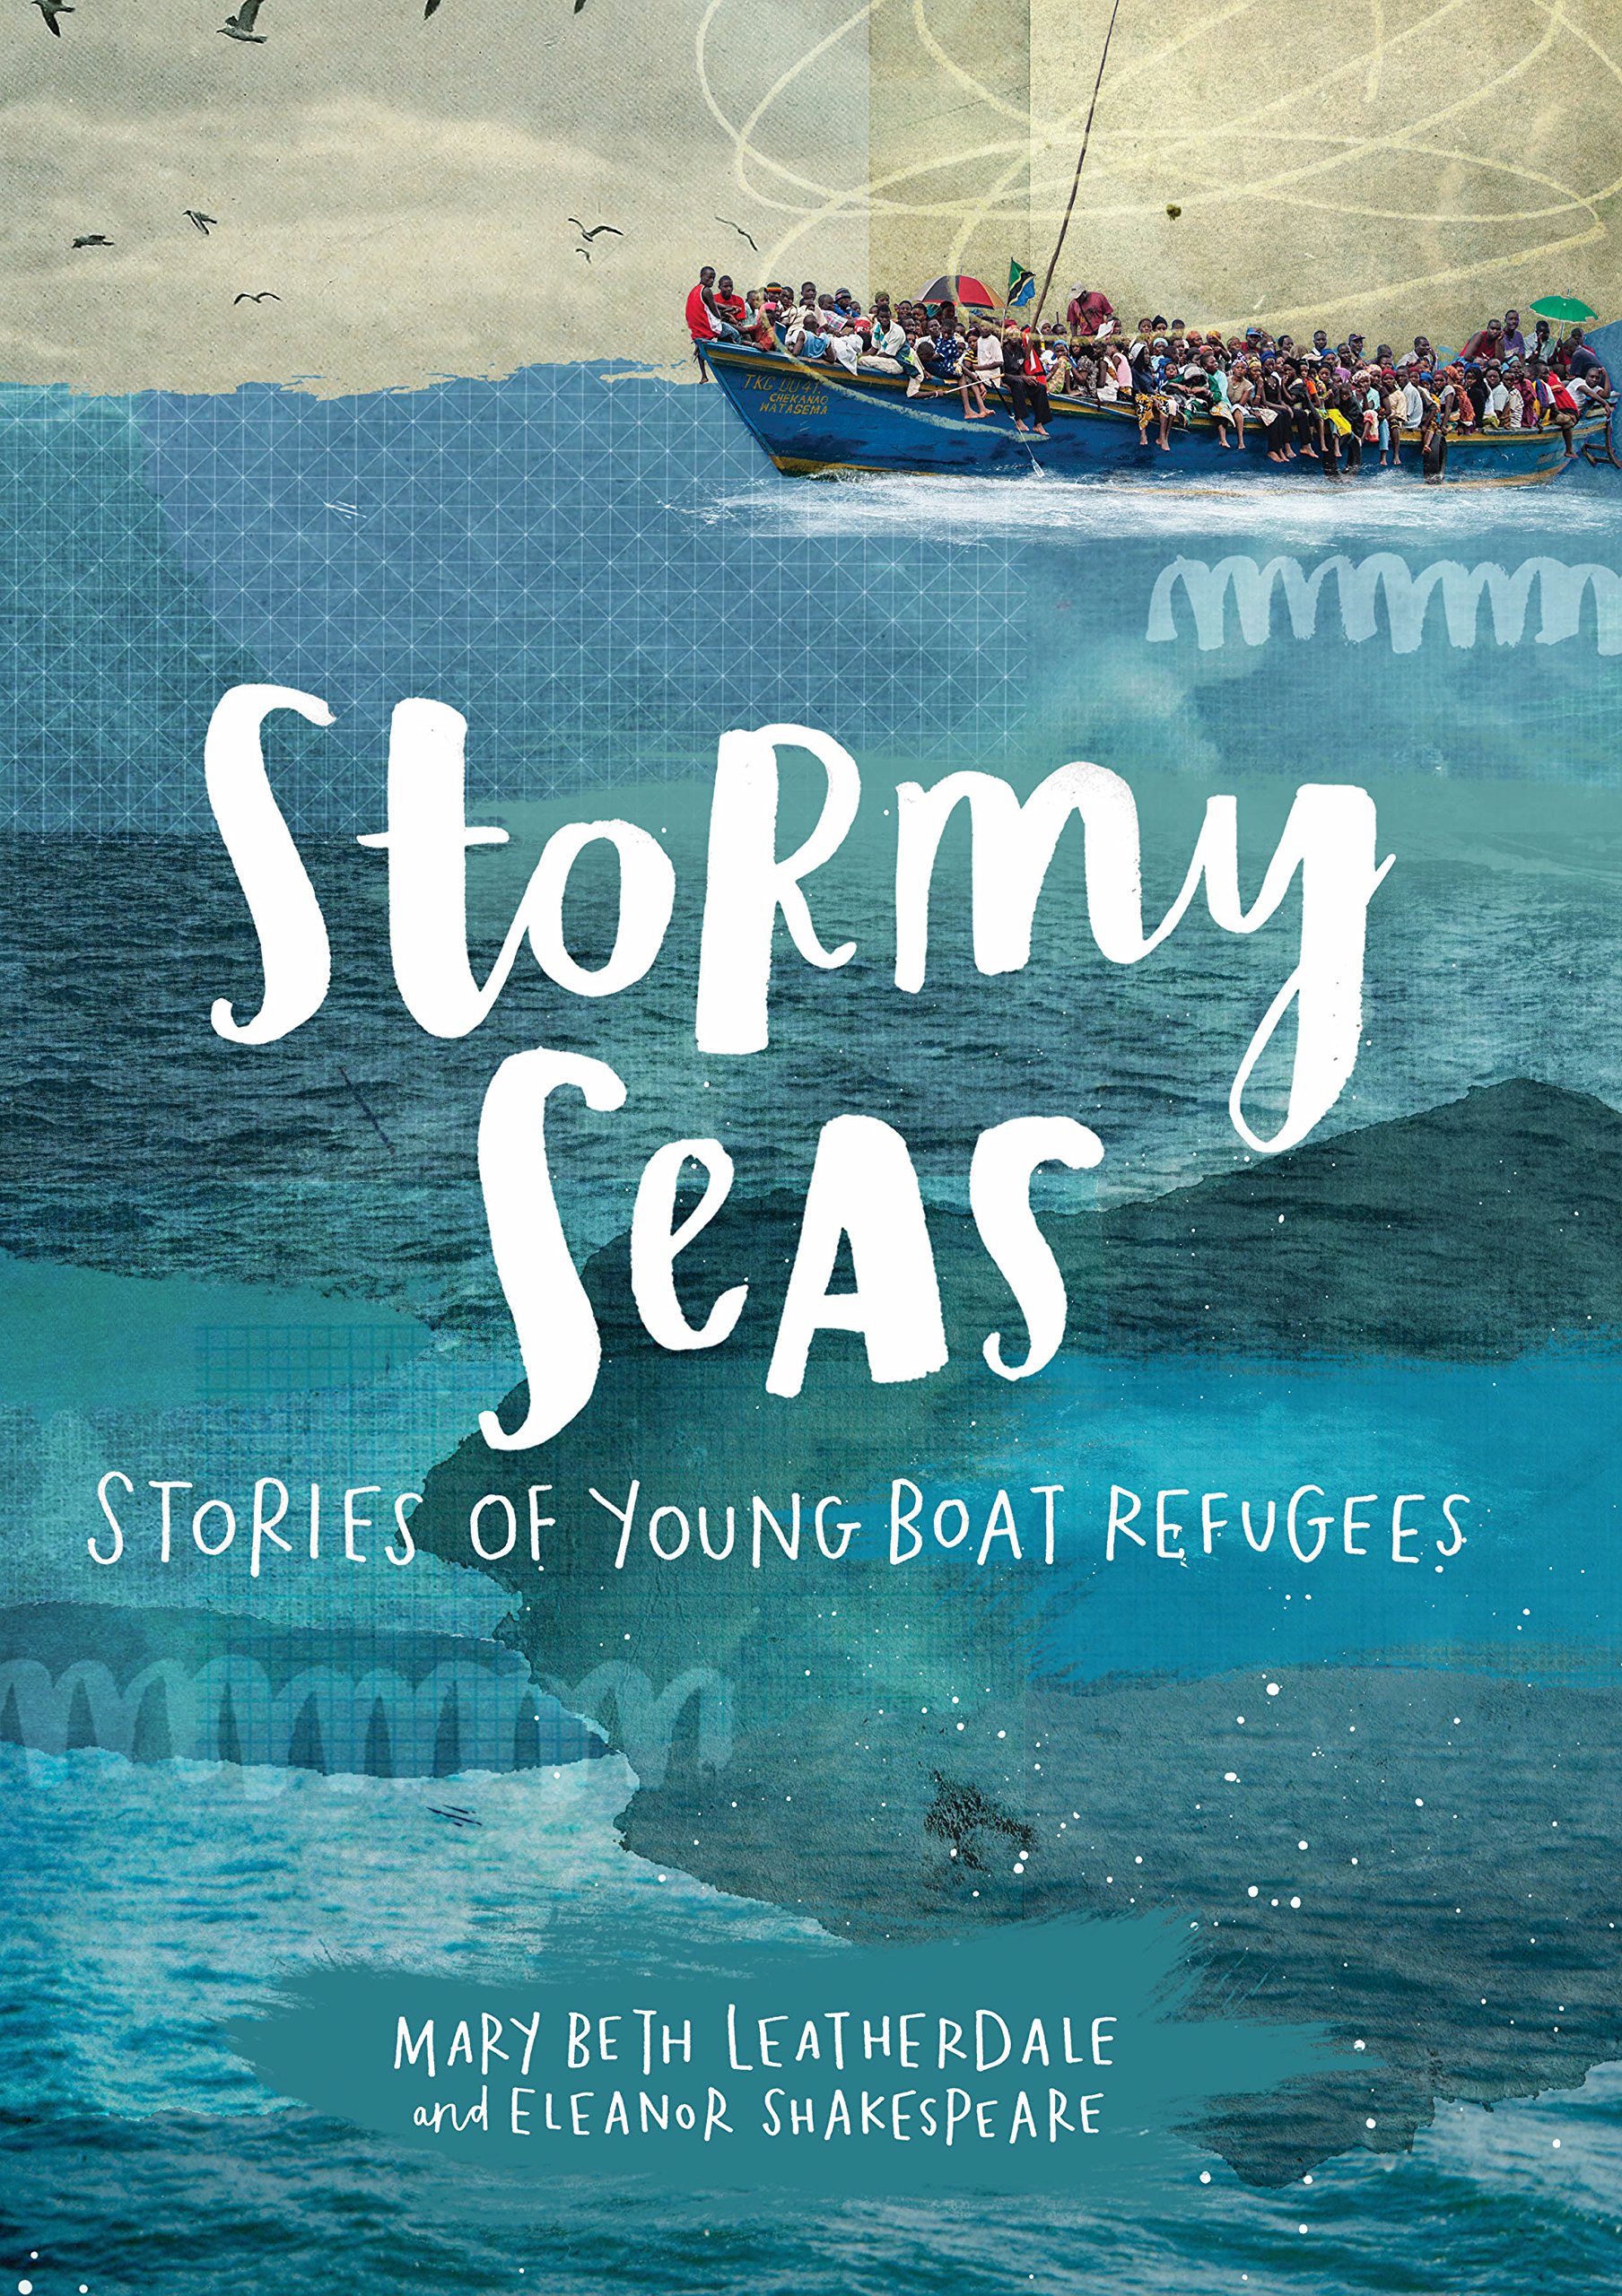 Stormy Seas: Stories of Young Boat Refugees